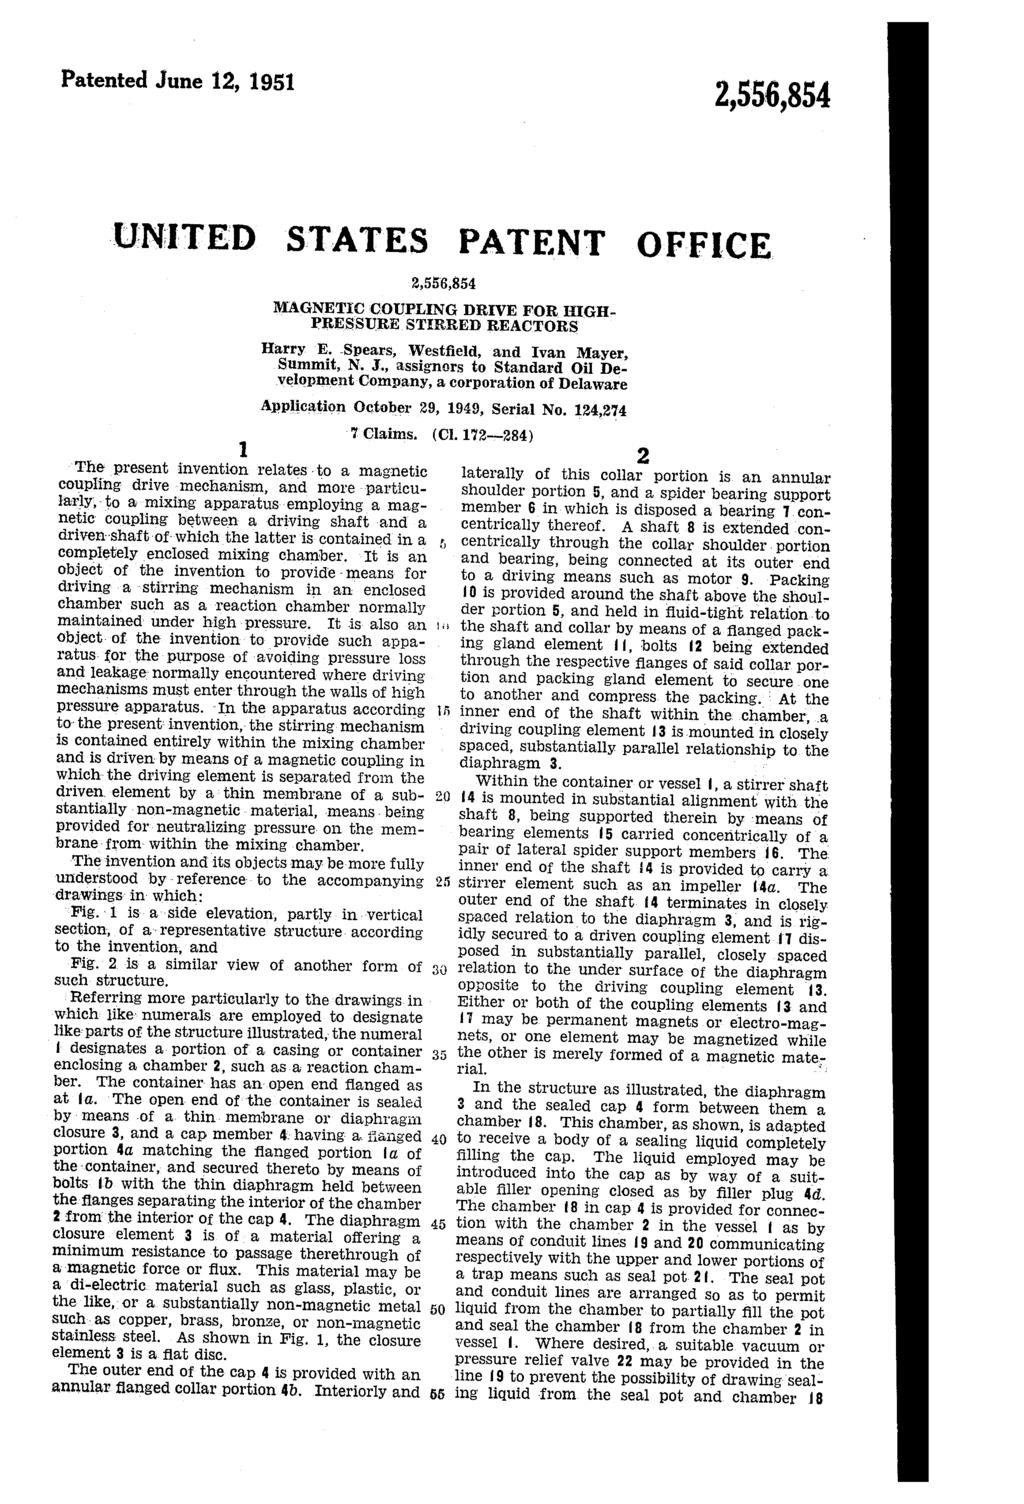 Patented June 12, 191 UNITED STATES PATENT OFFICE MAGNETC COUPLENG DRIVE FOR HIGH PRESSURE STRRED REACTORS Harry E. Spears, Westfield, and Ivan Mayer, Summit, N.J., assignors to Standard Oil De velopment Company, a corporation of Delaware Application October 29, 1949, Serial No.